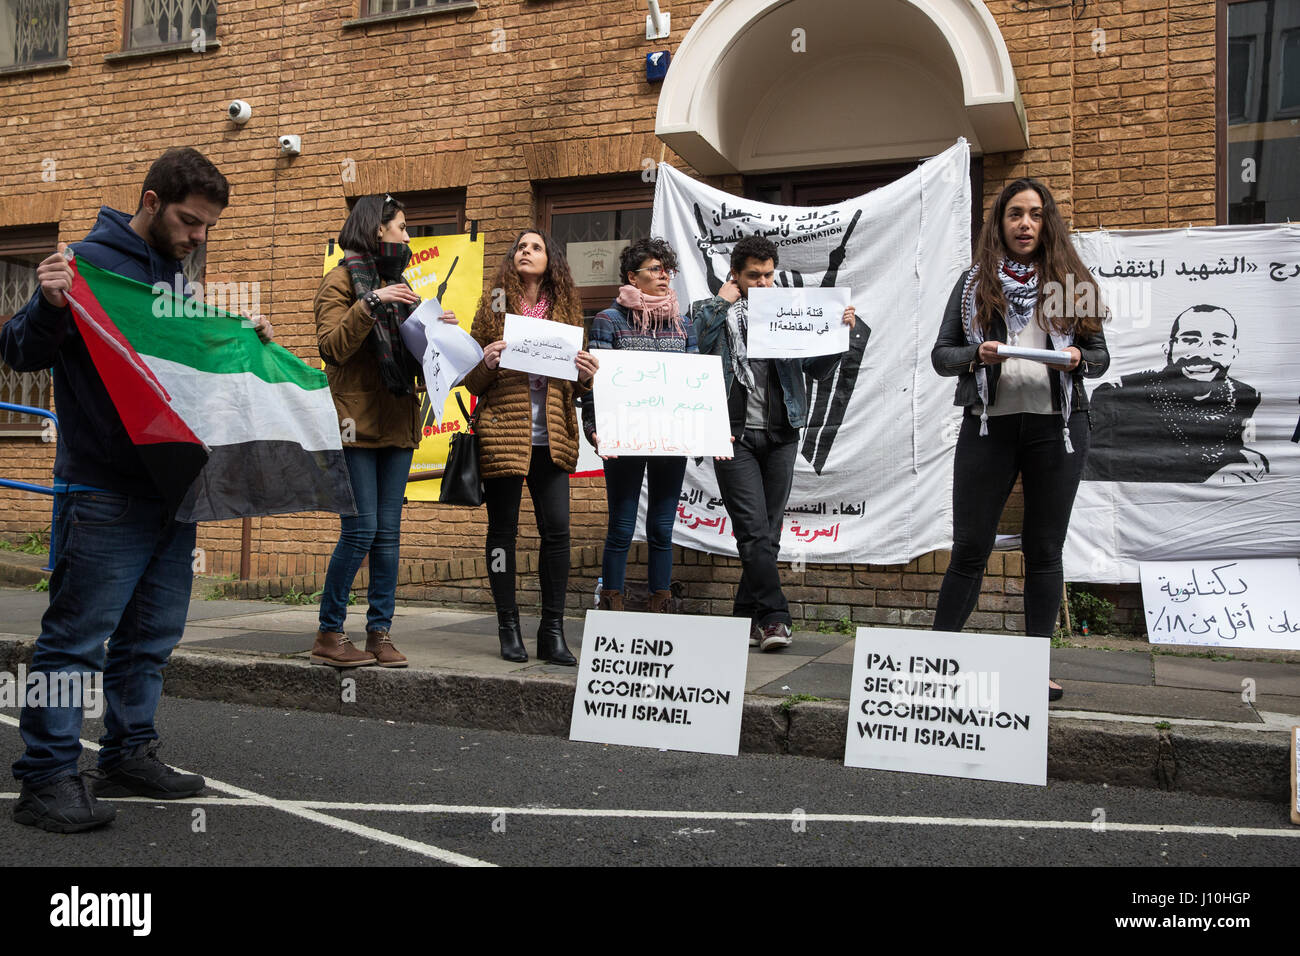 London, UK. 17th April, 2017. Activists protest outside the Palestinian Mission Office on Palestinian Prisoners’ Day to call on the Palestinian Authority to end its security coordination with Israel and to mark 40 days since the killing by Israeli soldiers of Palestinian intellectual Basel Al-Araj. Credit: Mark Kerrison/Alamy Live News Stock Photo